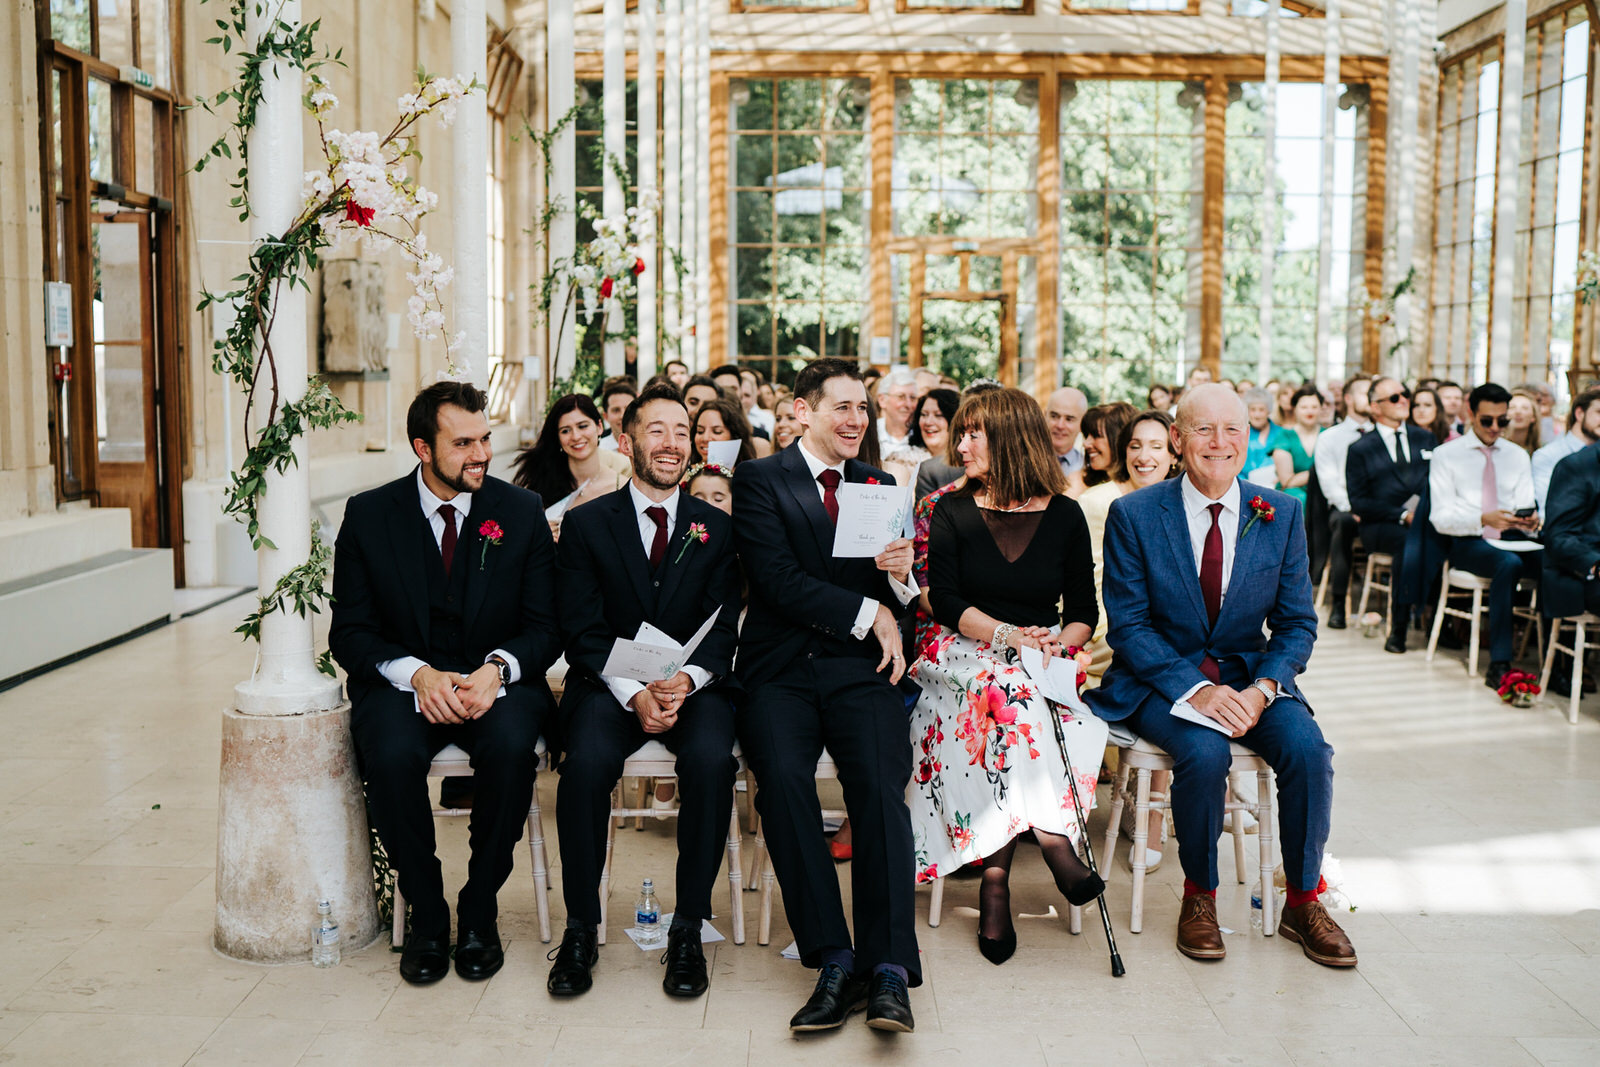  Grooms brothers, groomsmen and parents sit in the first row and smile 